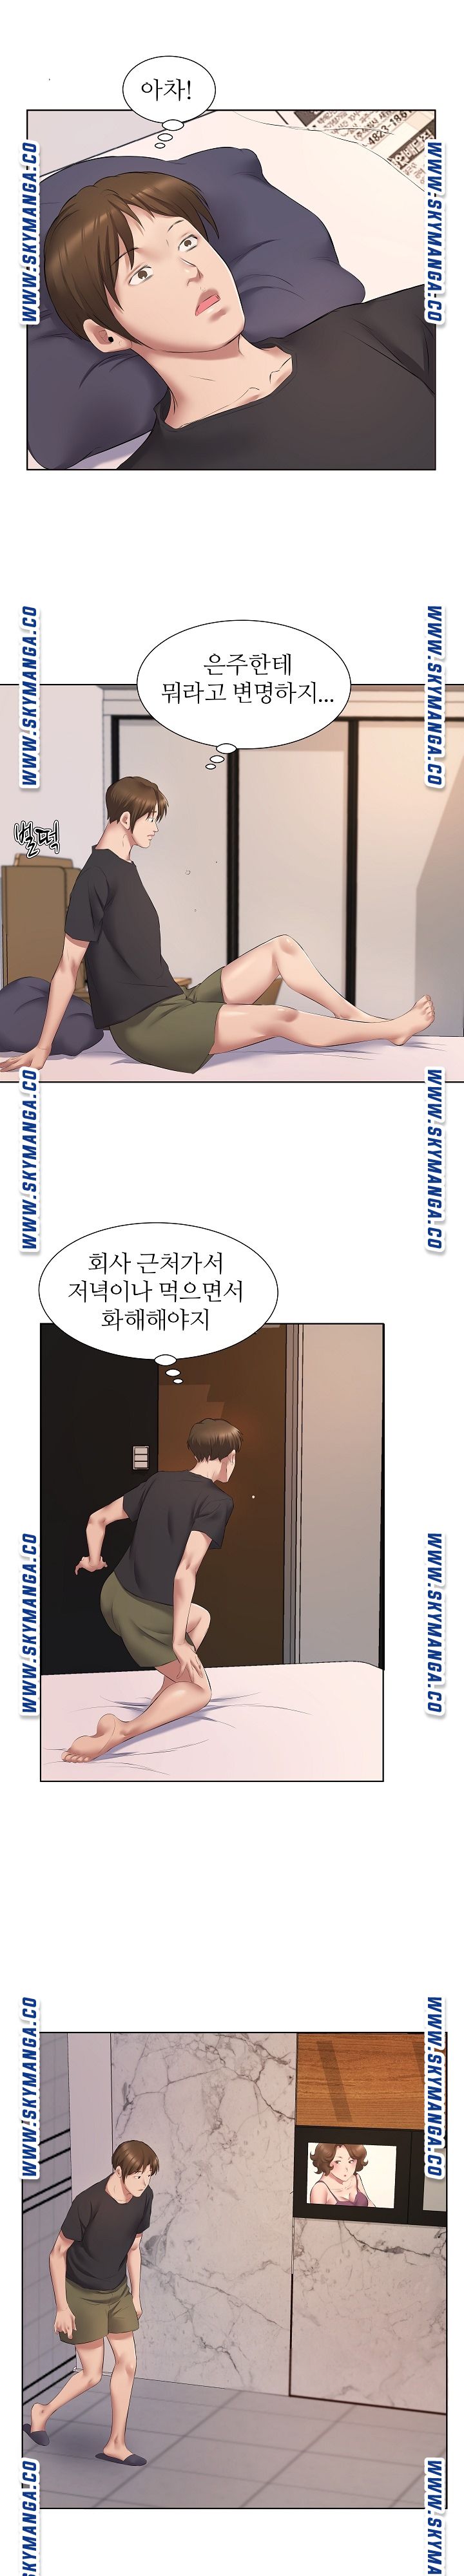 One Room Hotel Raw - Chapter 5 Page 8